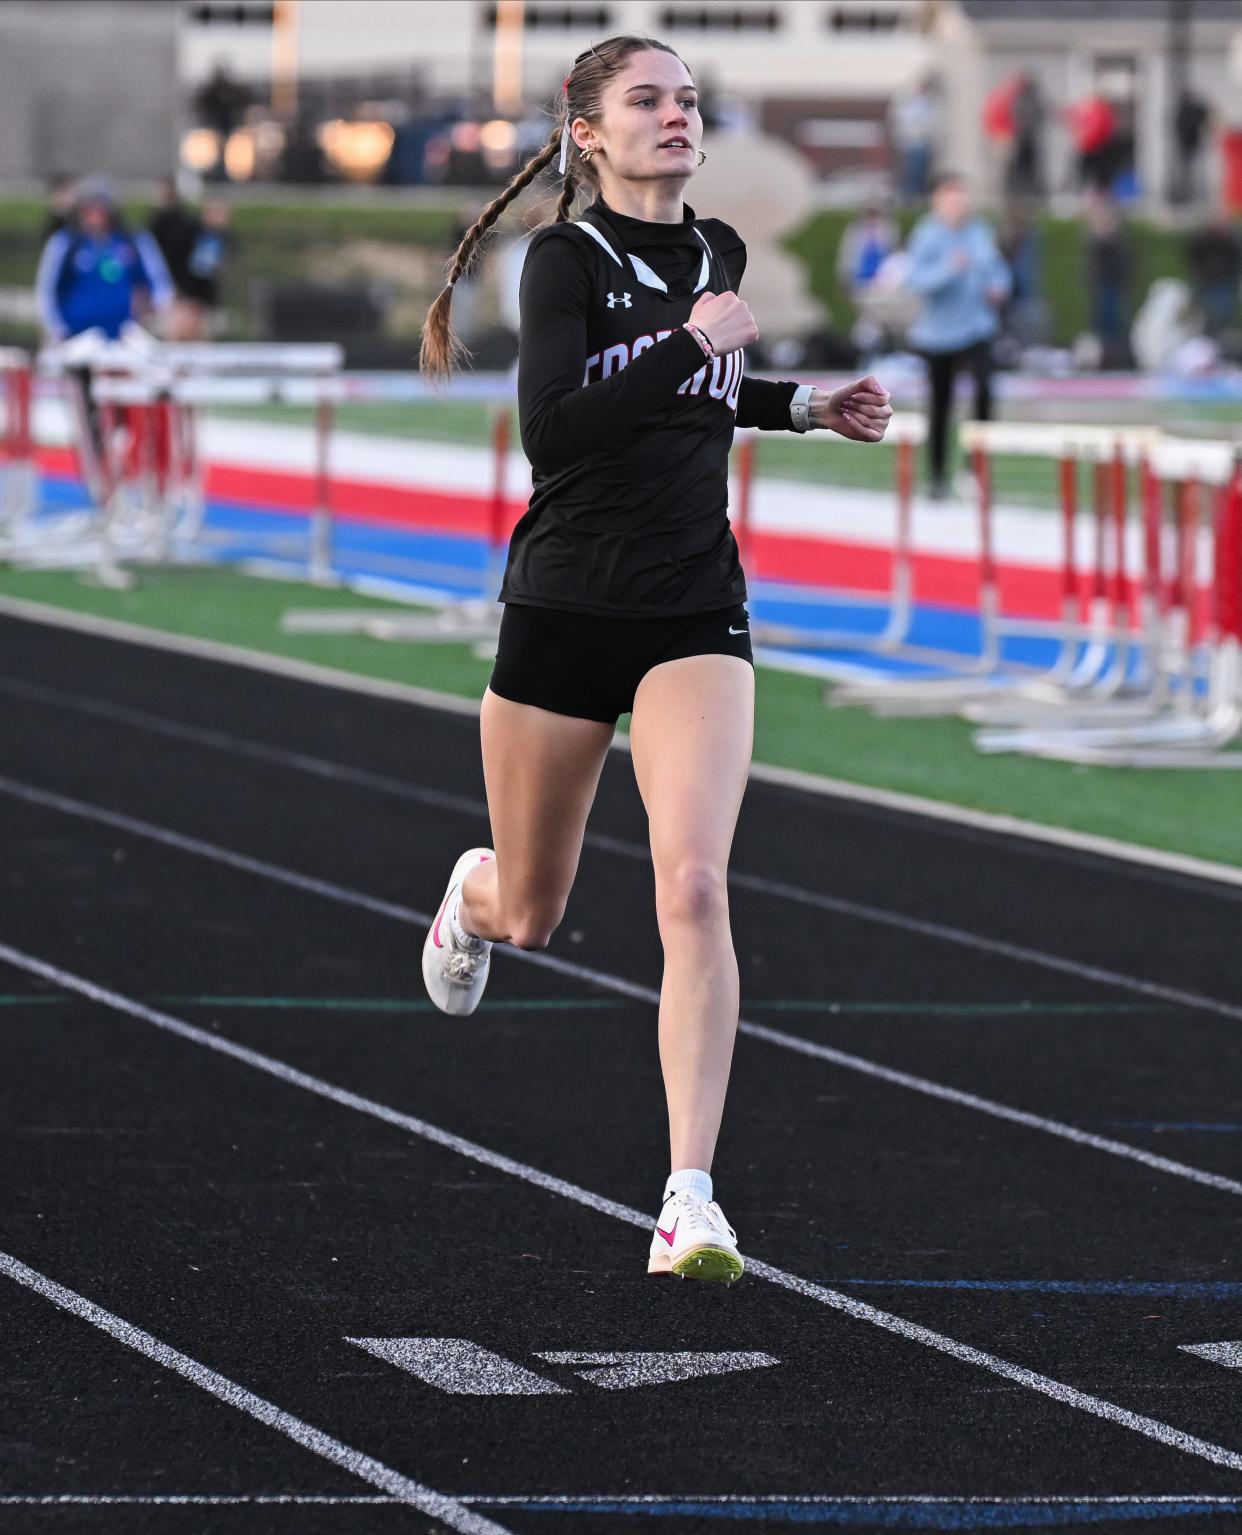 Edgewood’s Emma Edwards nears the finish line in the girls' 400 meter dash during the track meet at Owen Valley on Thursday, March 28, 2024.